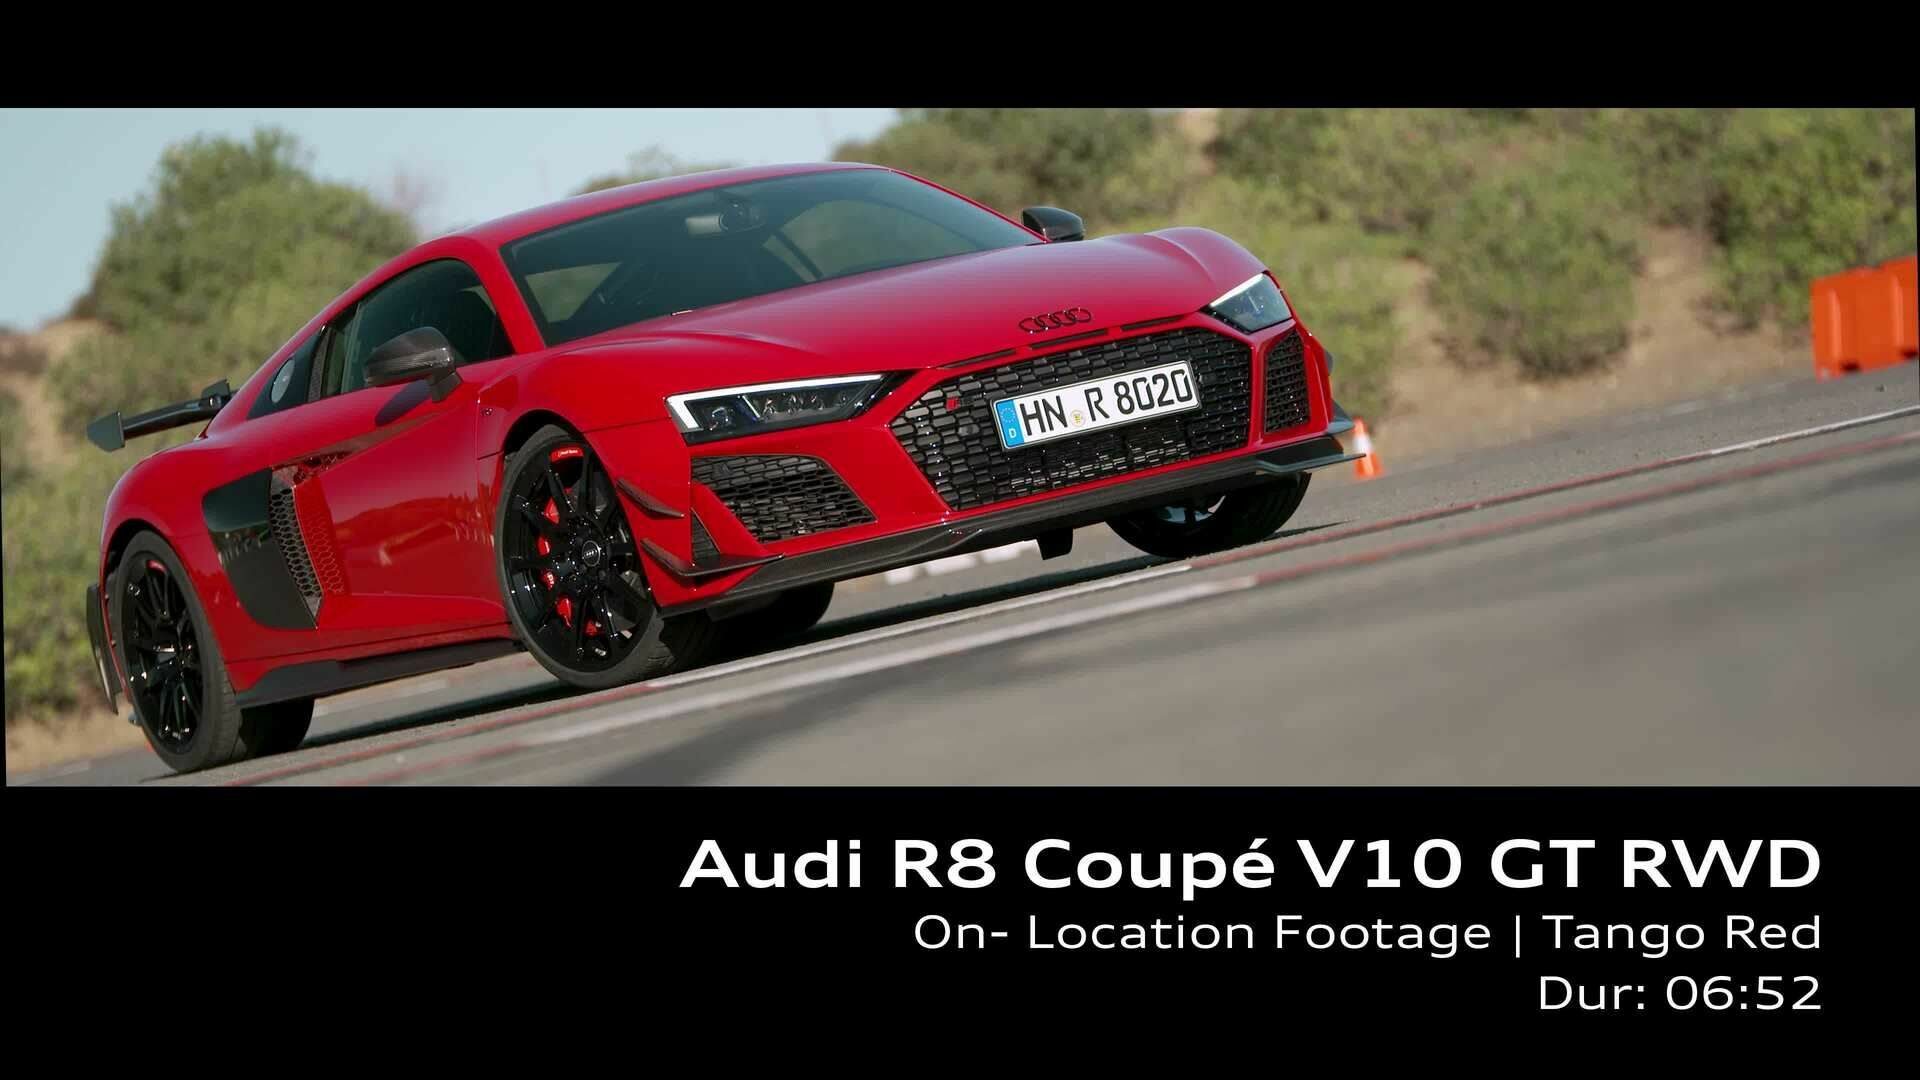 Footage: Audi R8 Coupé V10 GT RWD Tango Red